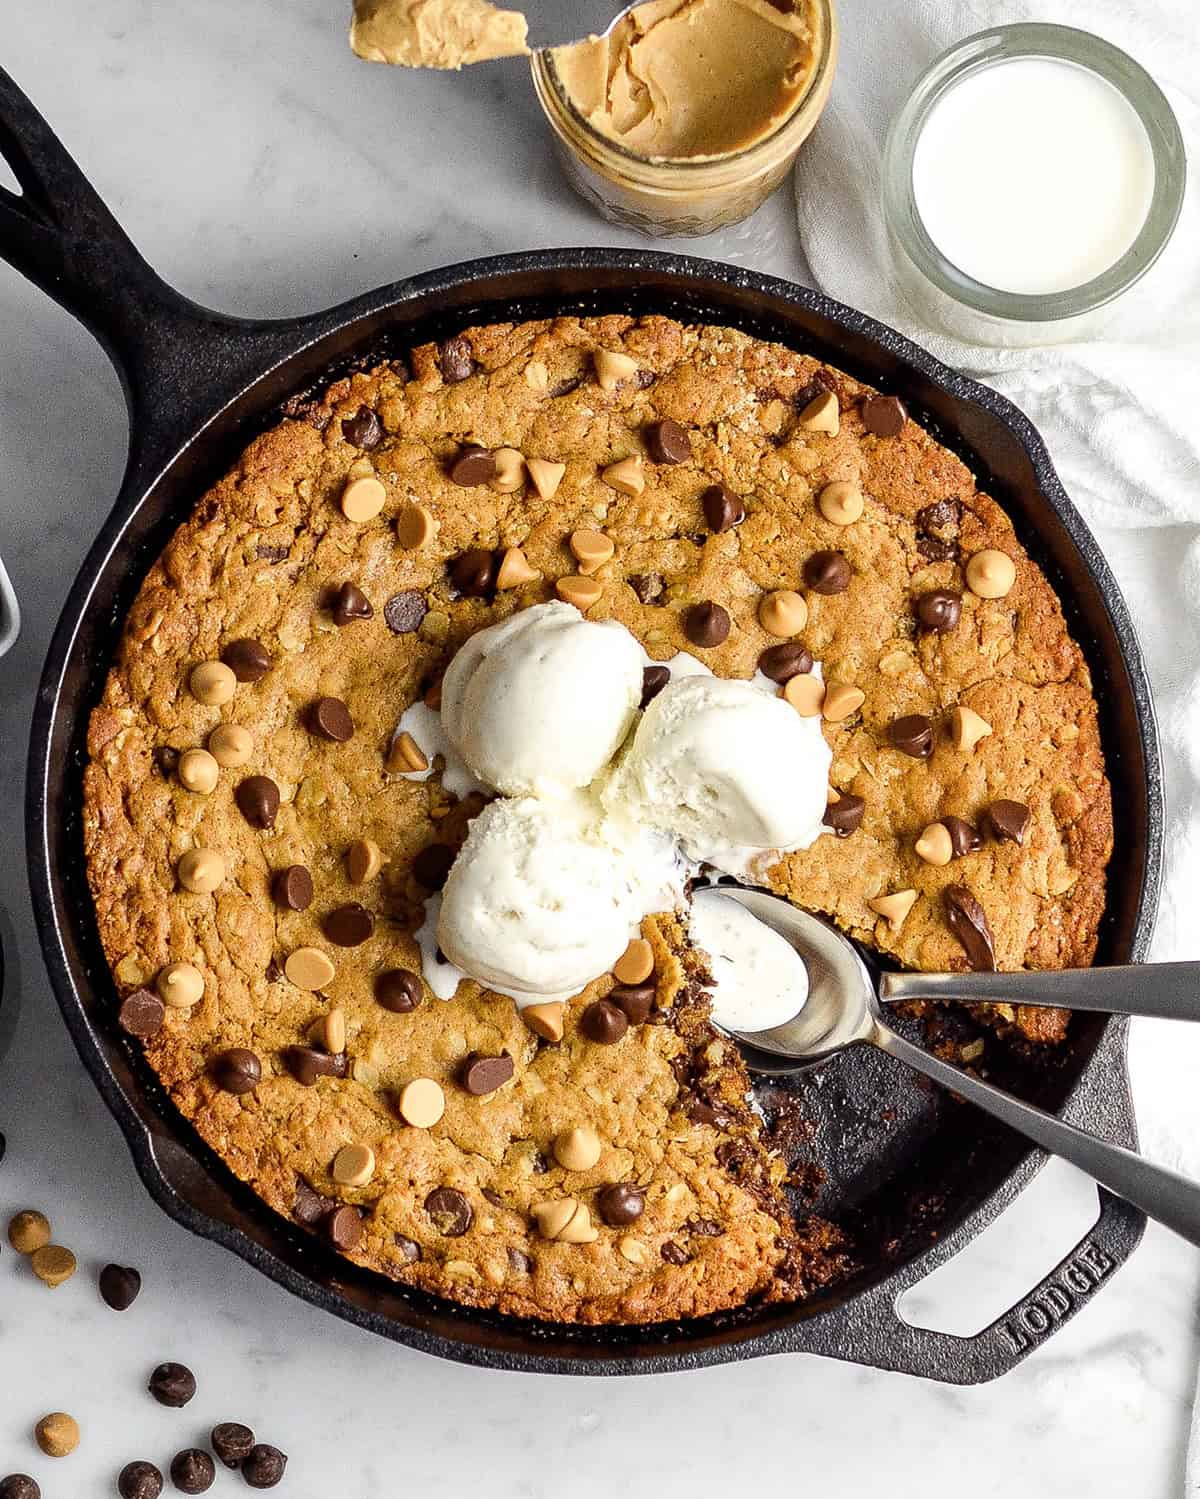 Skillet Peanut Butter Cookie with a piece cut out of it and 3 scoops of ice cream on top and two spoons